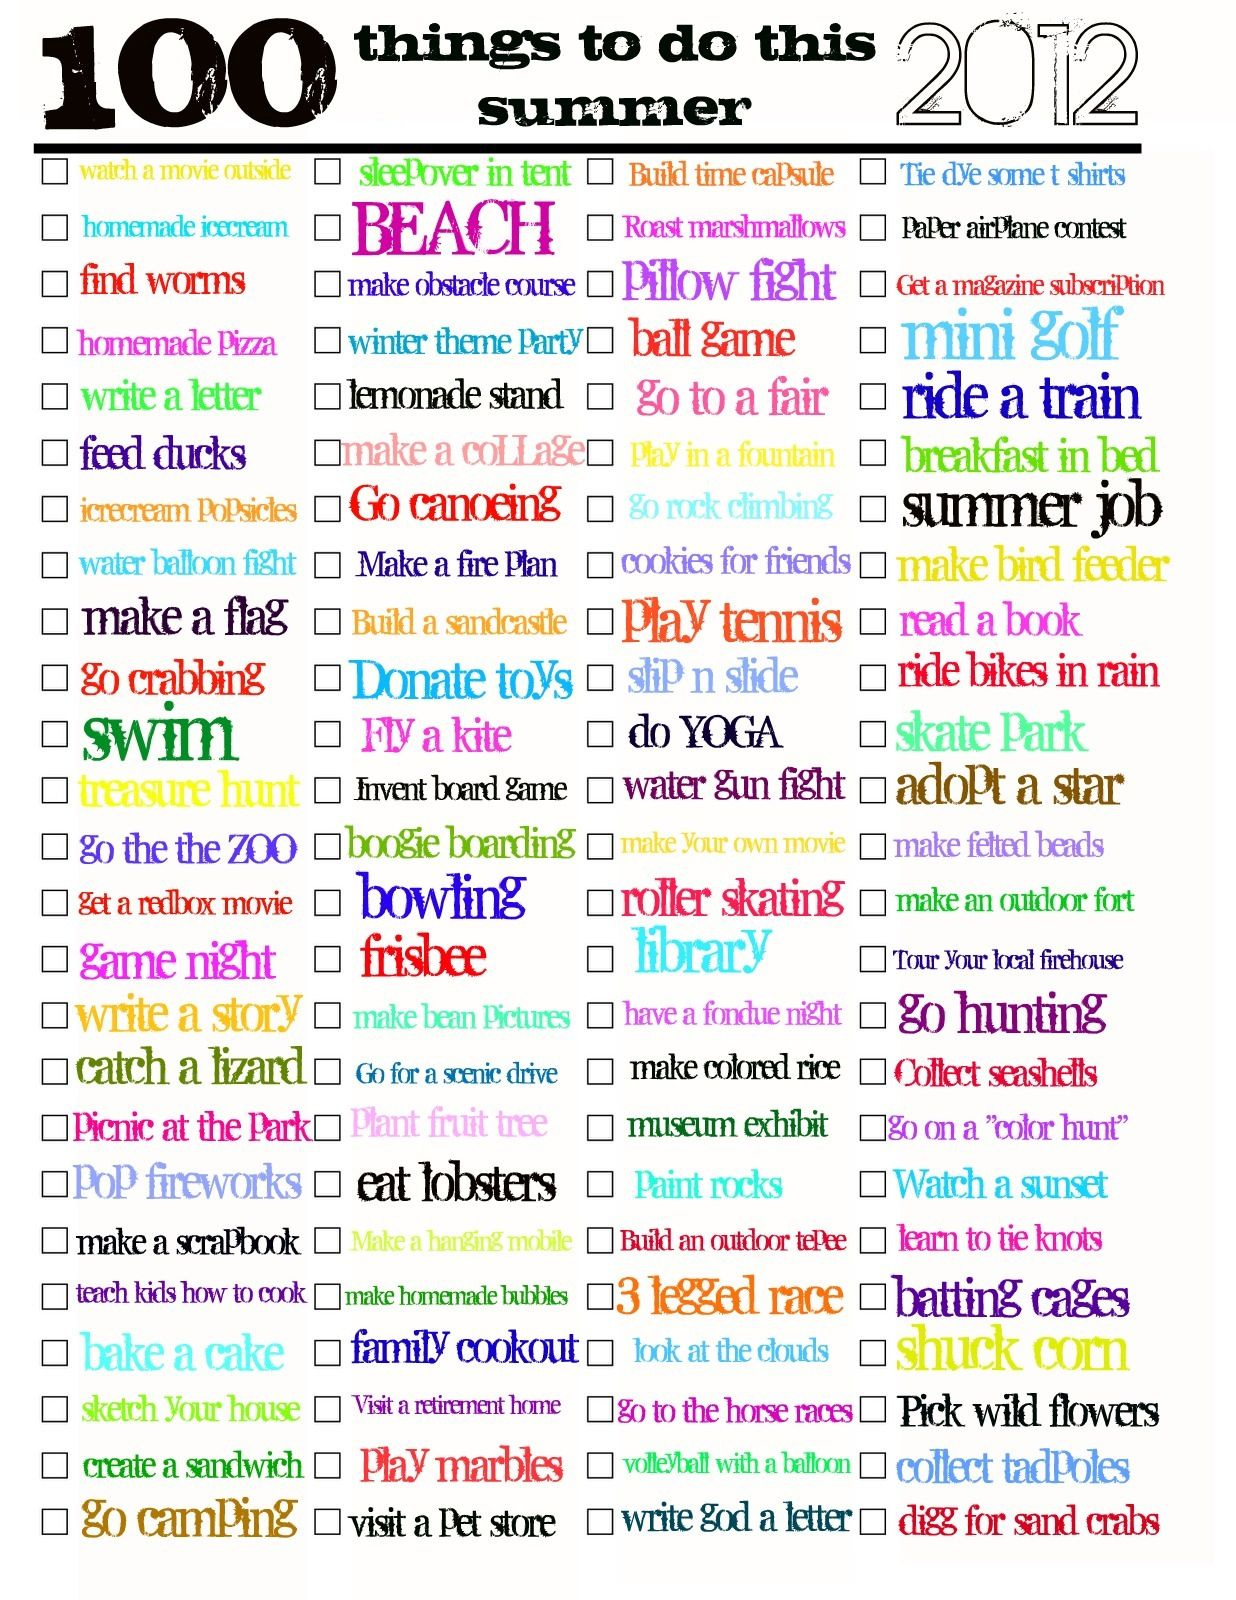 100 Things To Do This SUMMER PDF JADERBOMB Summer To Do List 